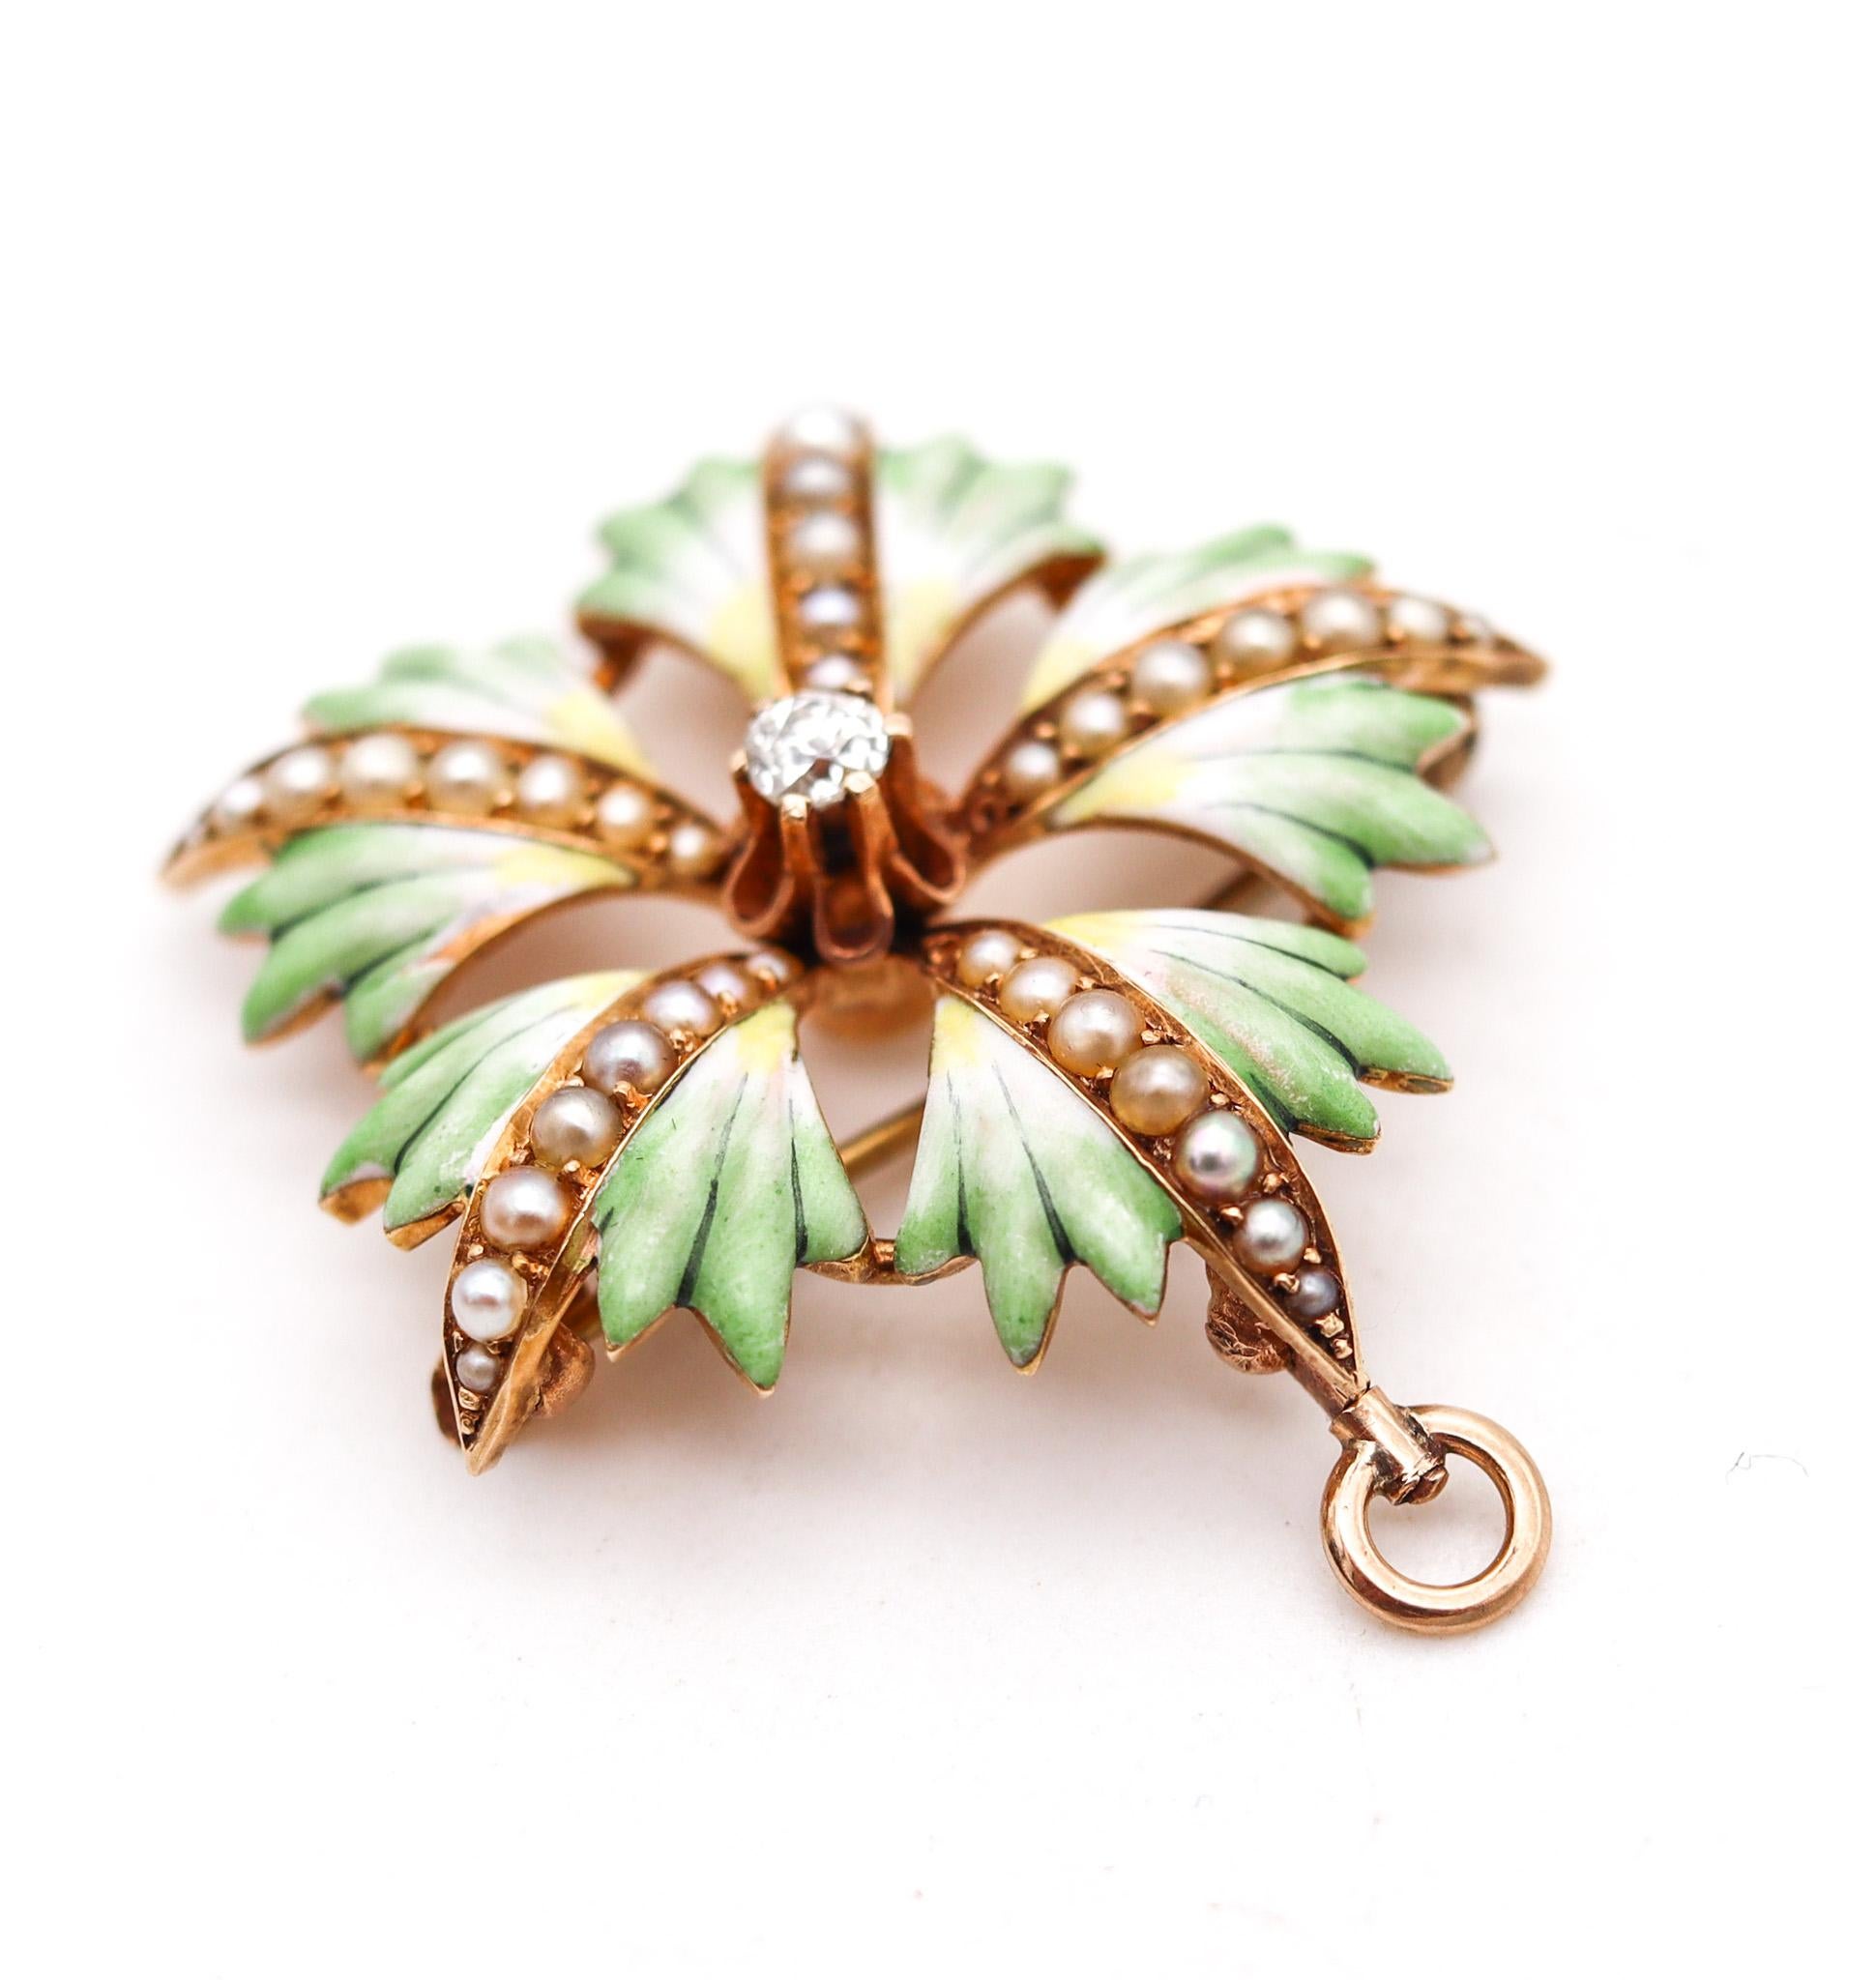 Edwardian 1905 Enameled Flower Pendant Brooch In 14Kt Gold With Diamond & Pearls In Excellent Condition For Sale In Miami, FL